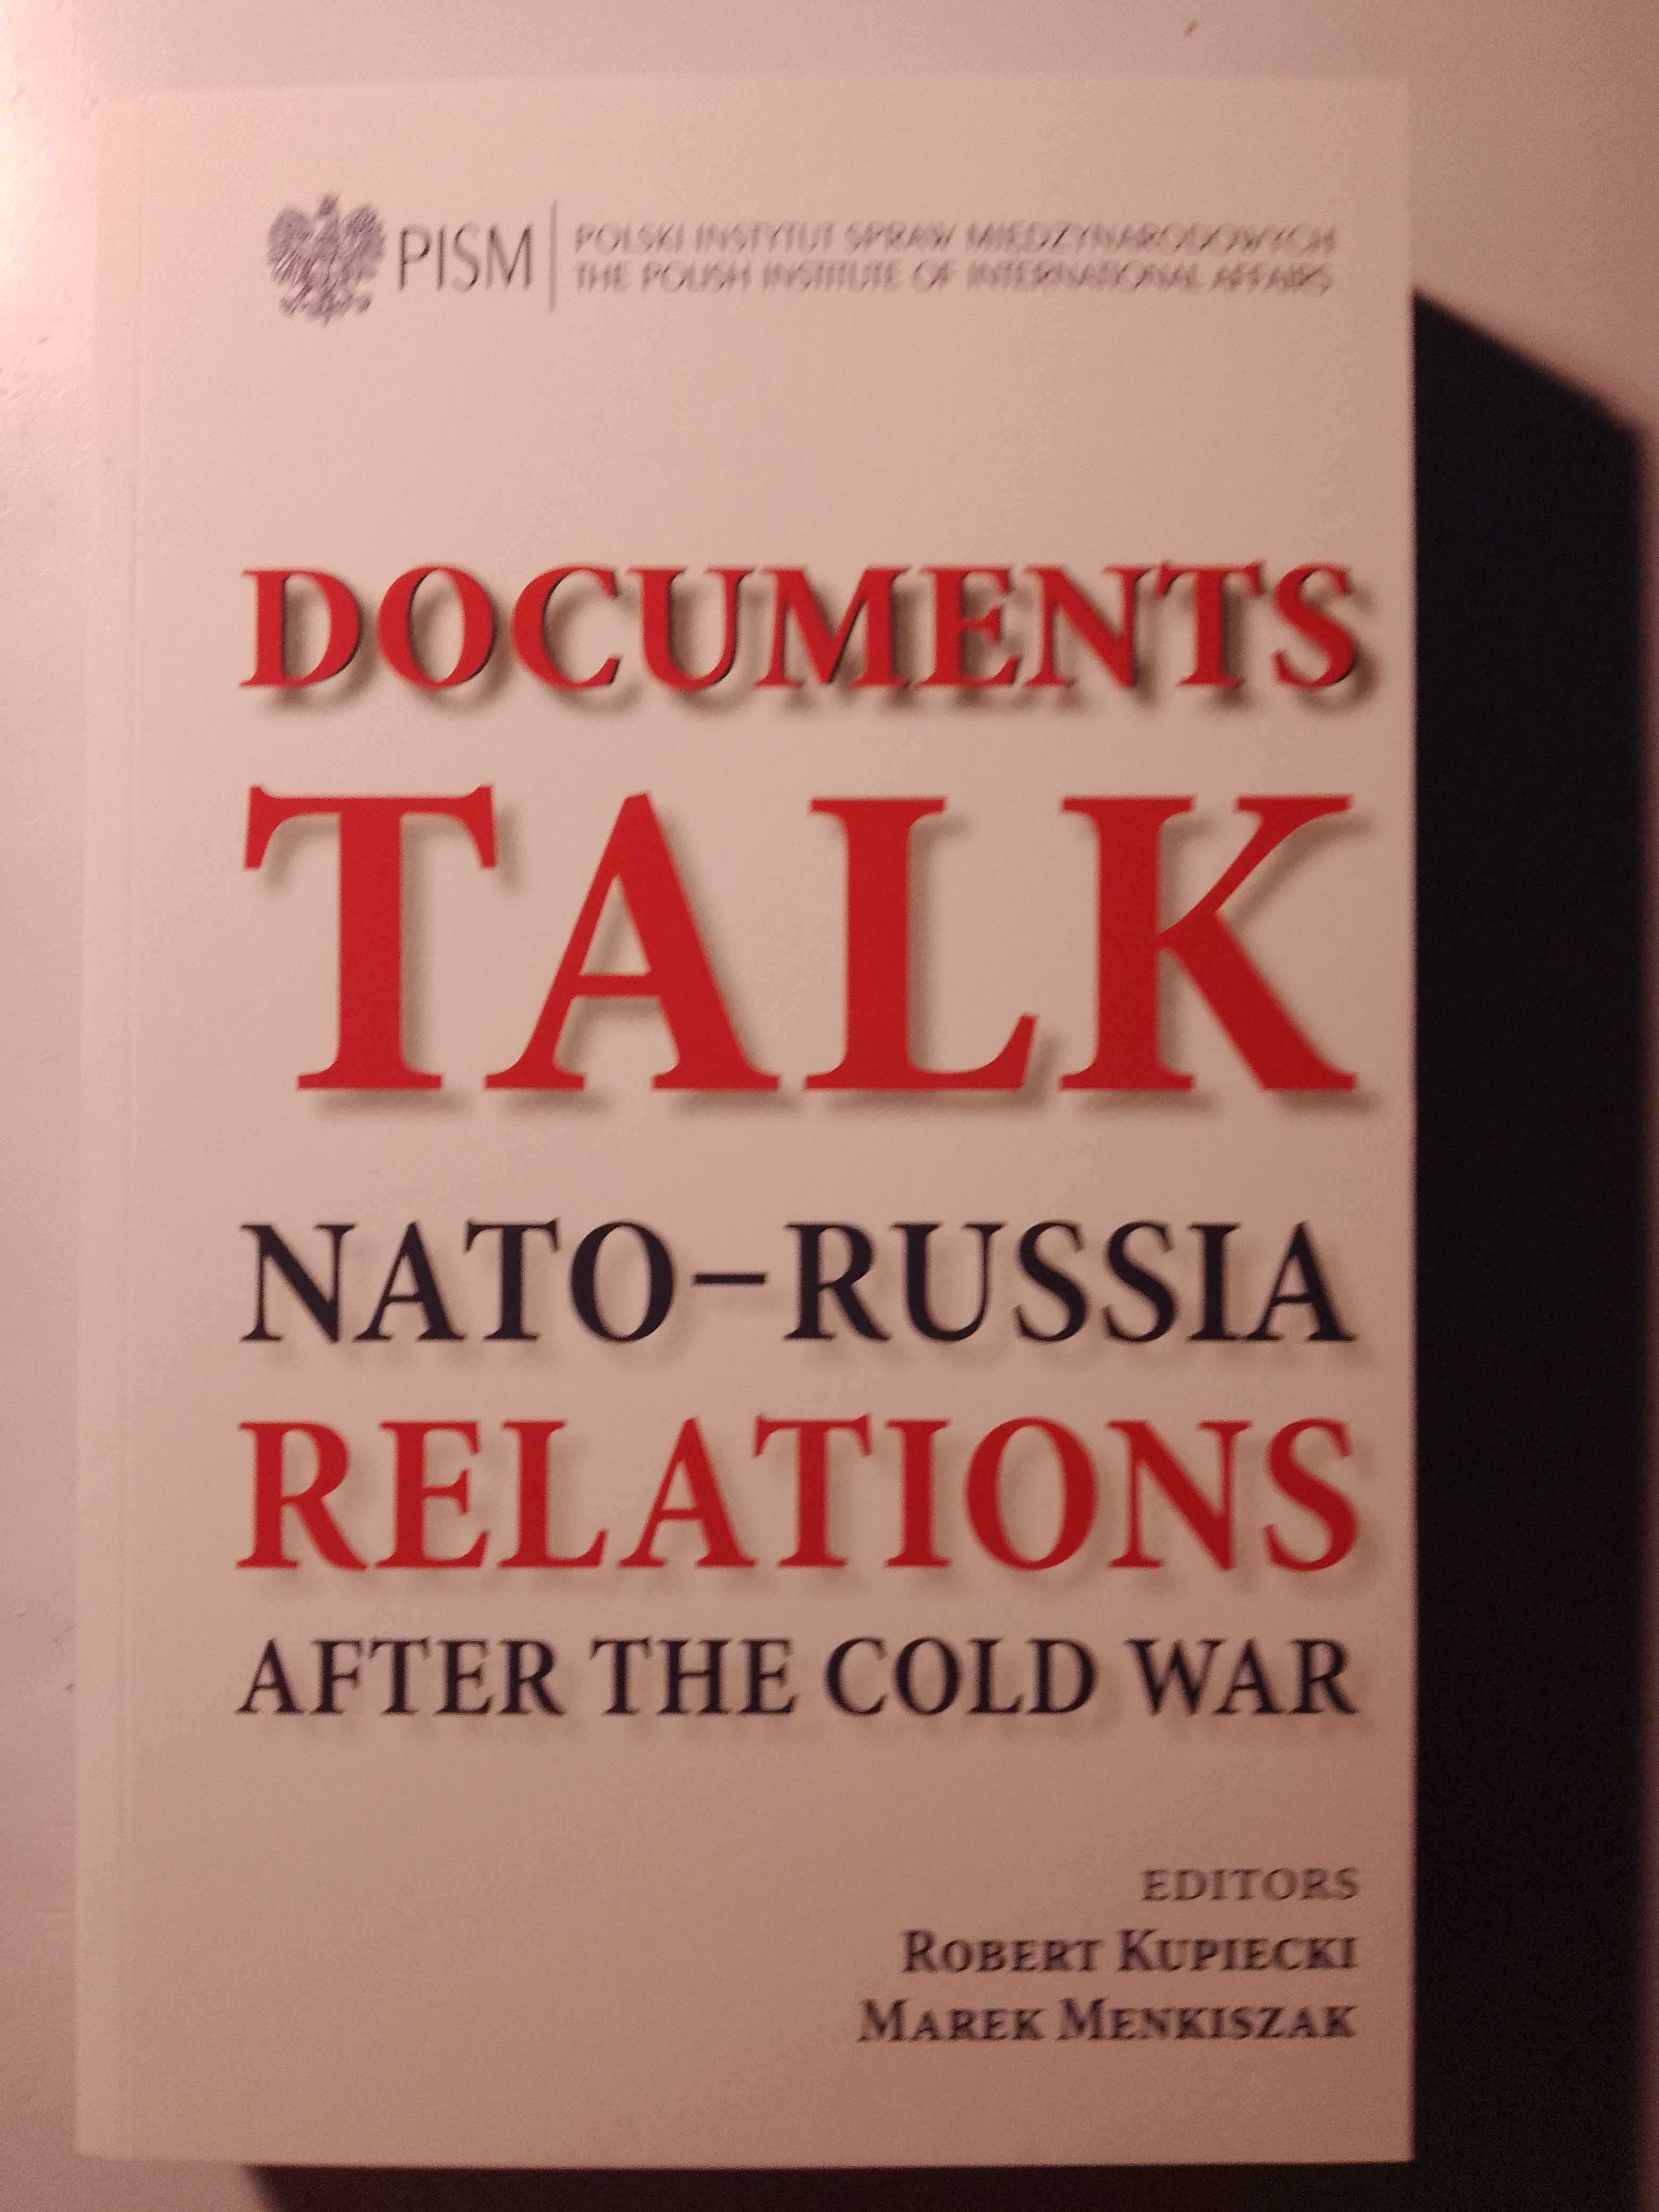 Documents Talk. NATO-RUSSIA Relations after the Cold War